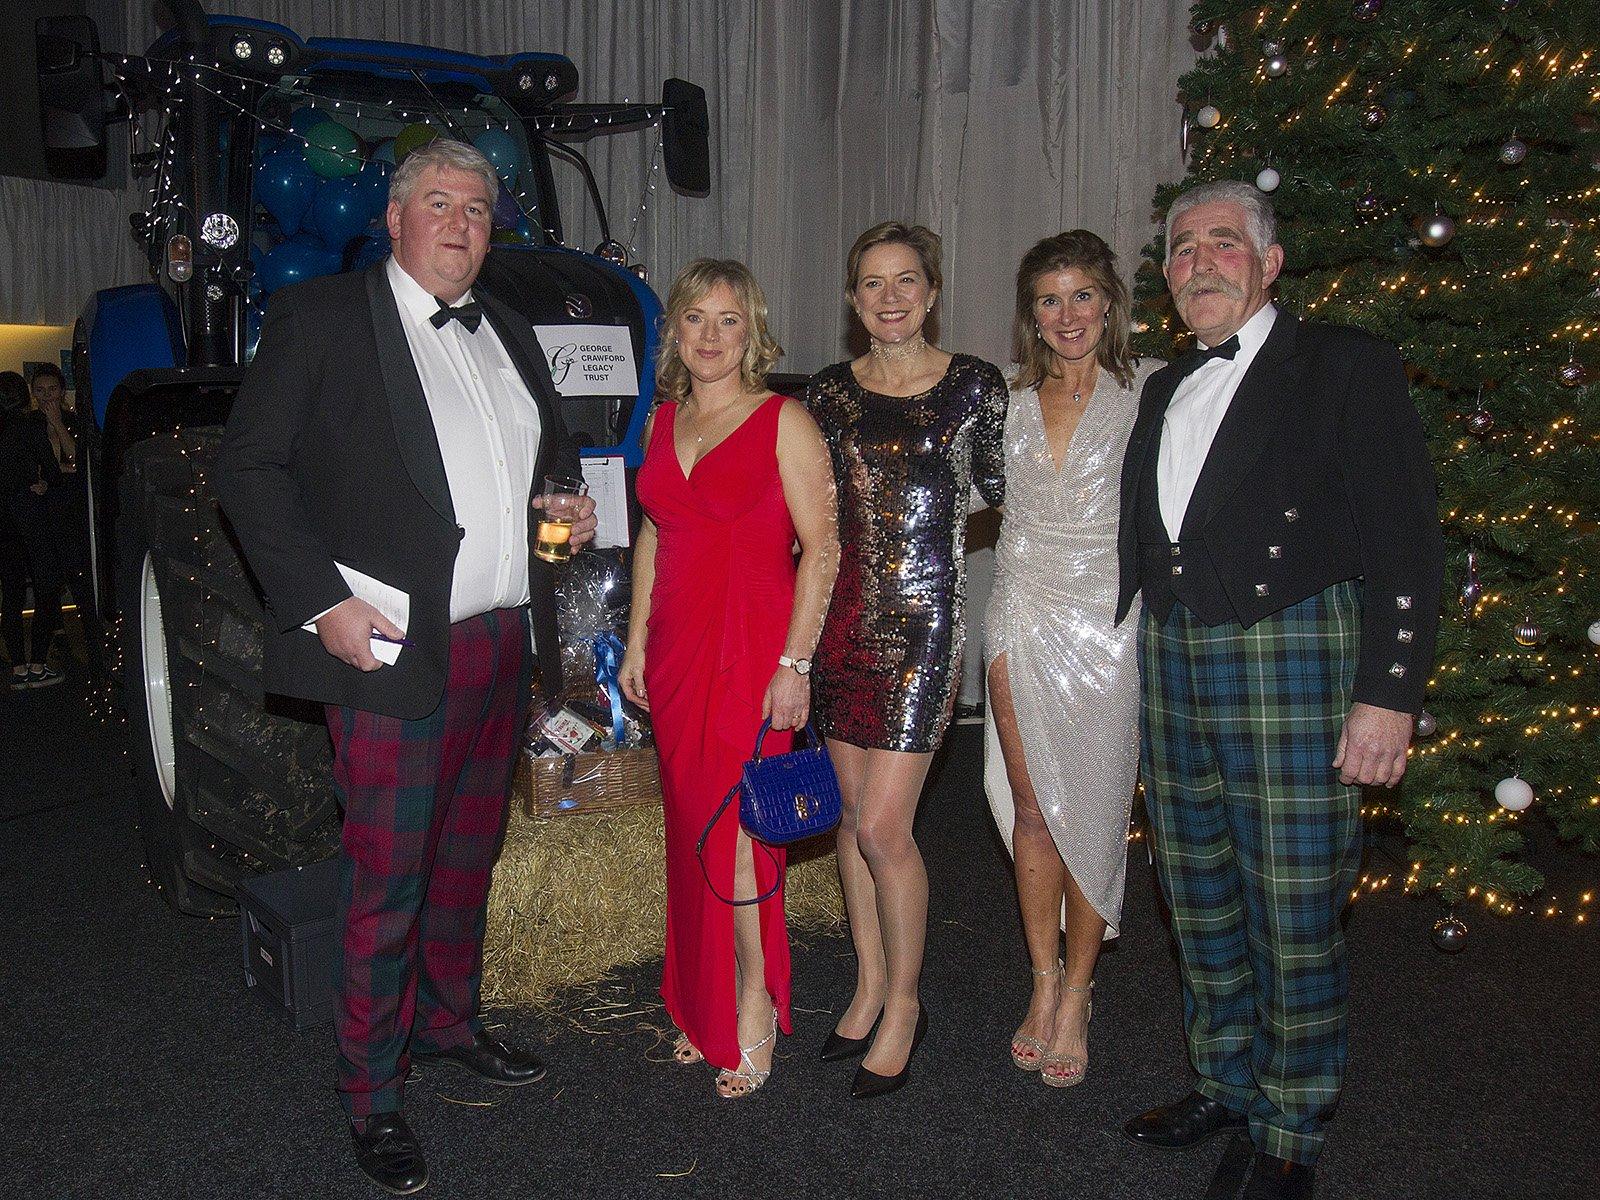 MC Charlie Rutherford, committee members Penny Stratford, Emma McCallum, Mary Crawford and Nigel Brown gave a vote of thanks at Saturday's ball in Kelso in memory of George Crawford.